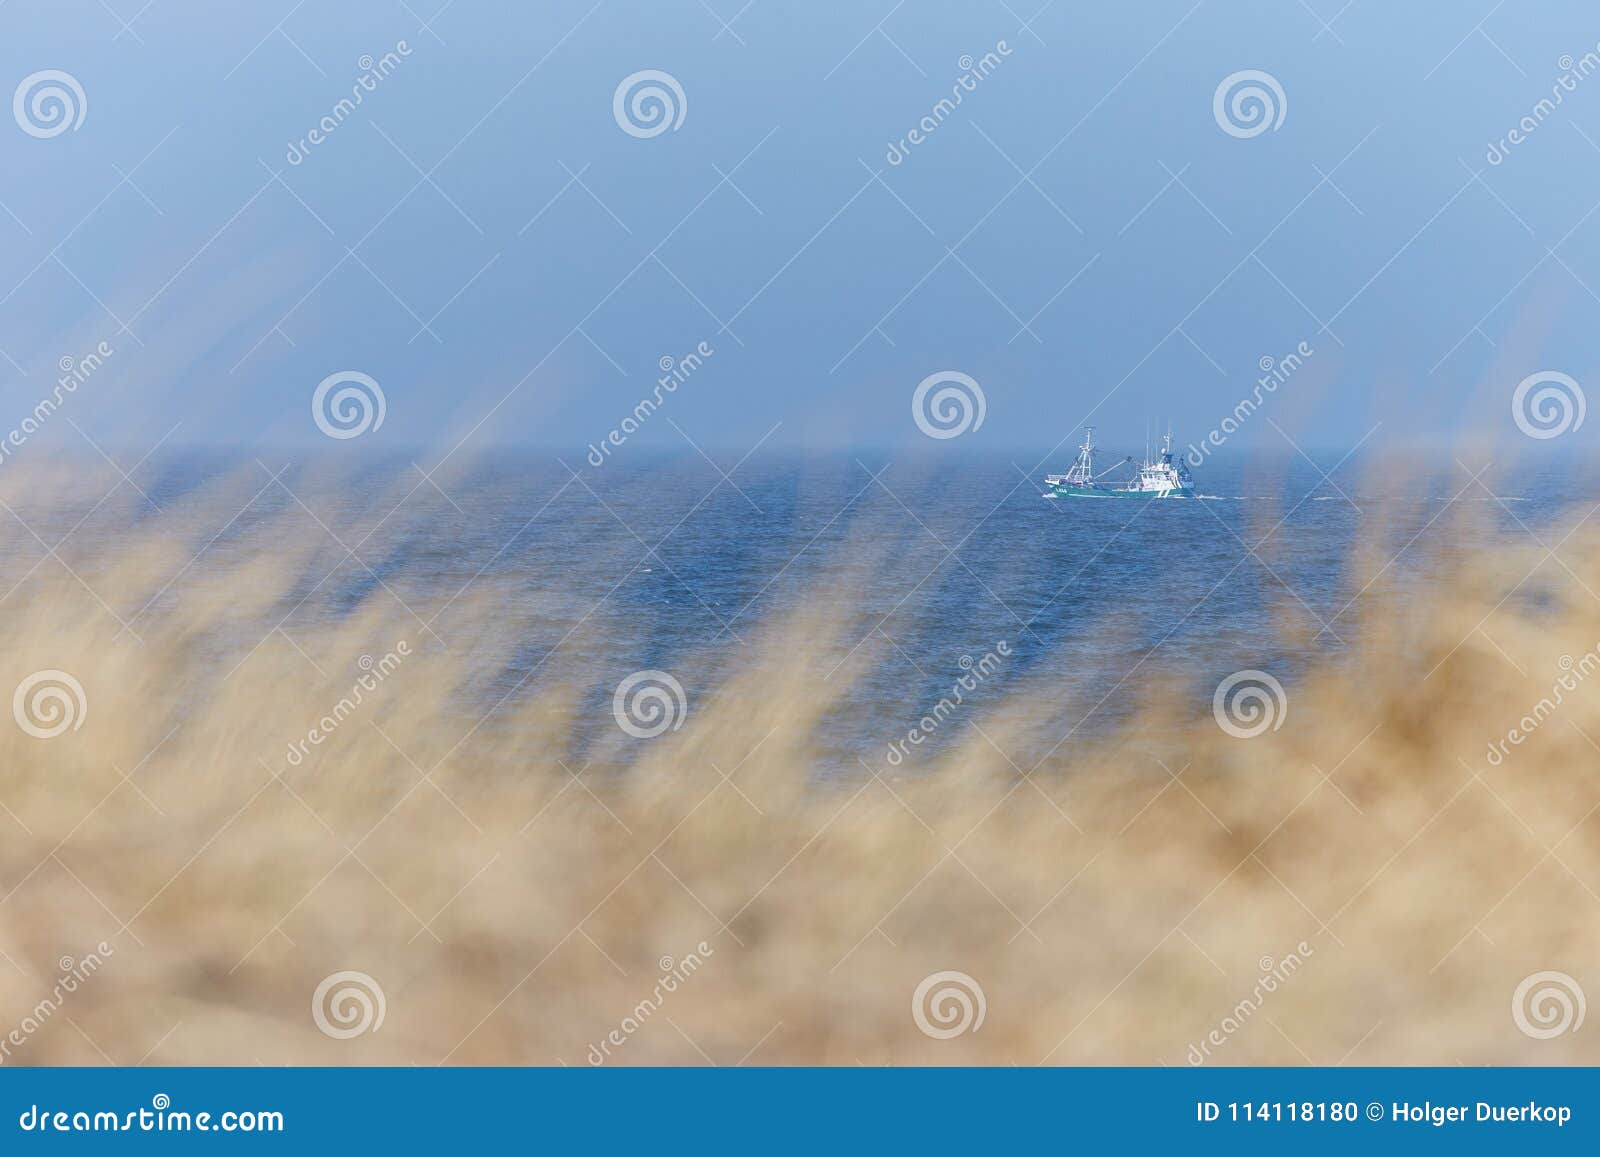 north sea coast in denmark with fishing boat editorial